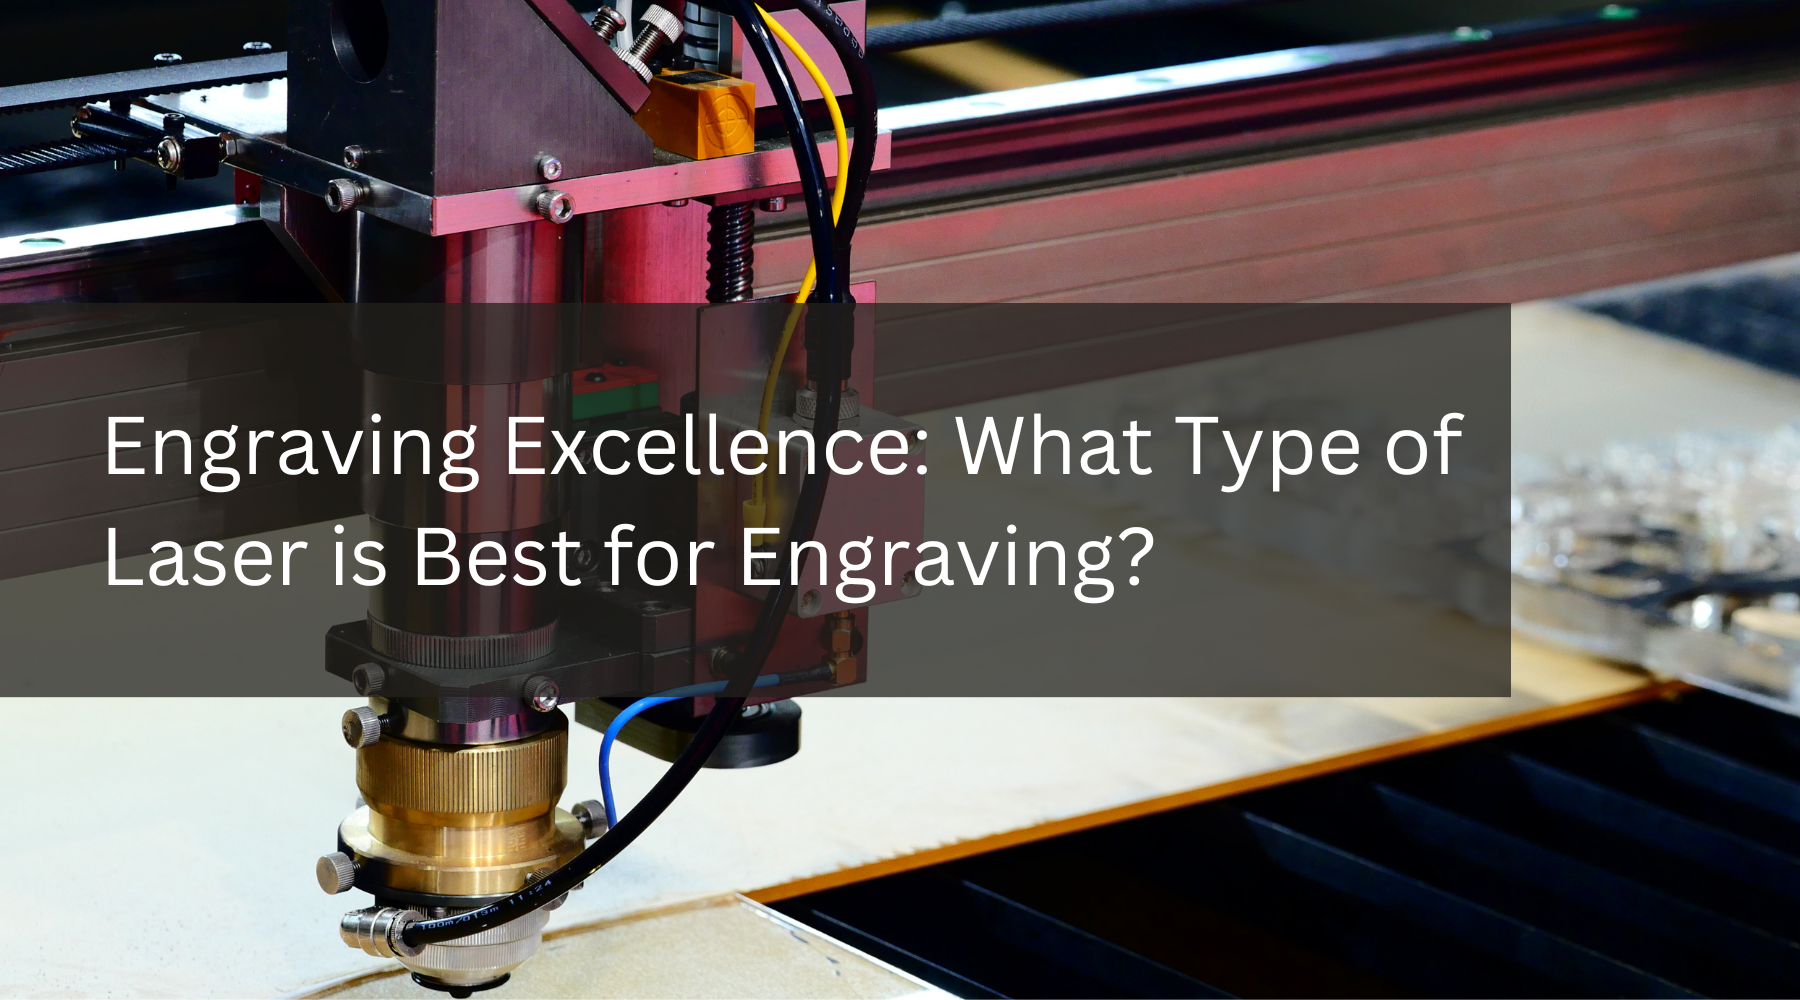 Engraving Excellence: What Type of Laser is Best for Engraving?